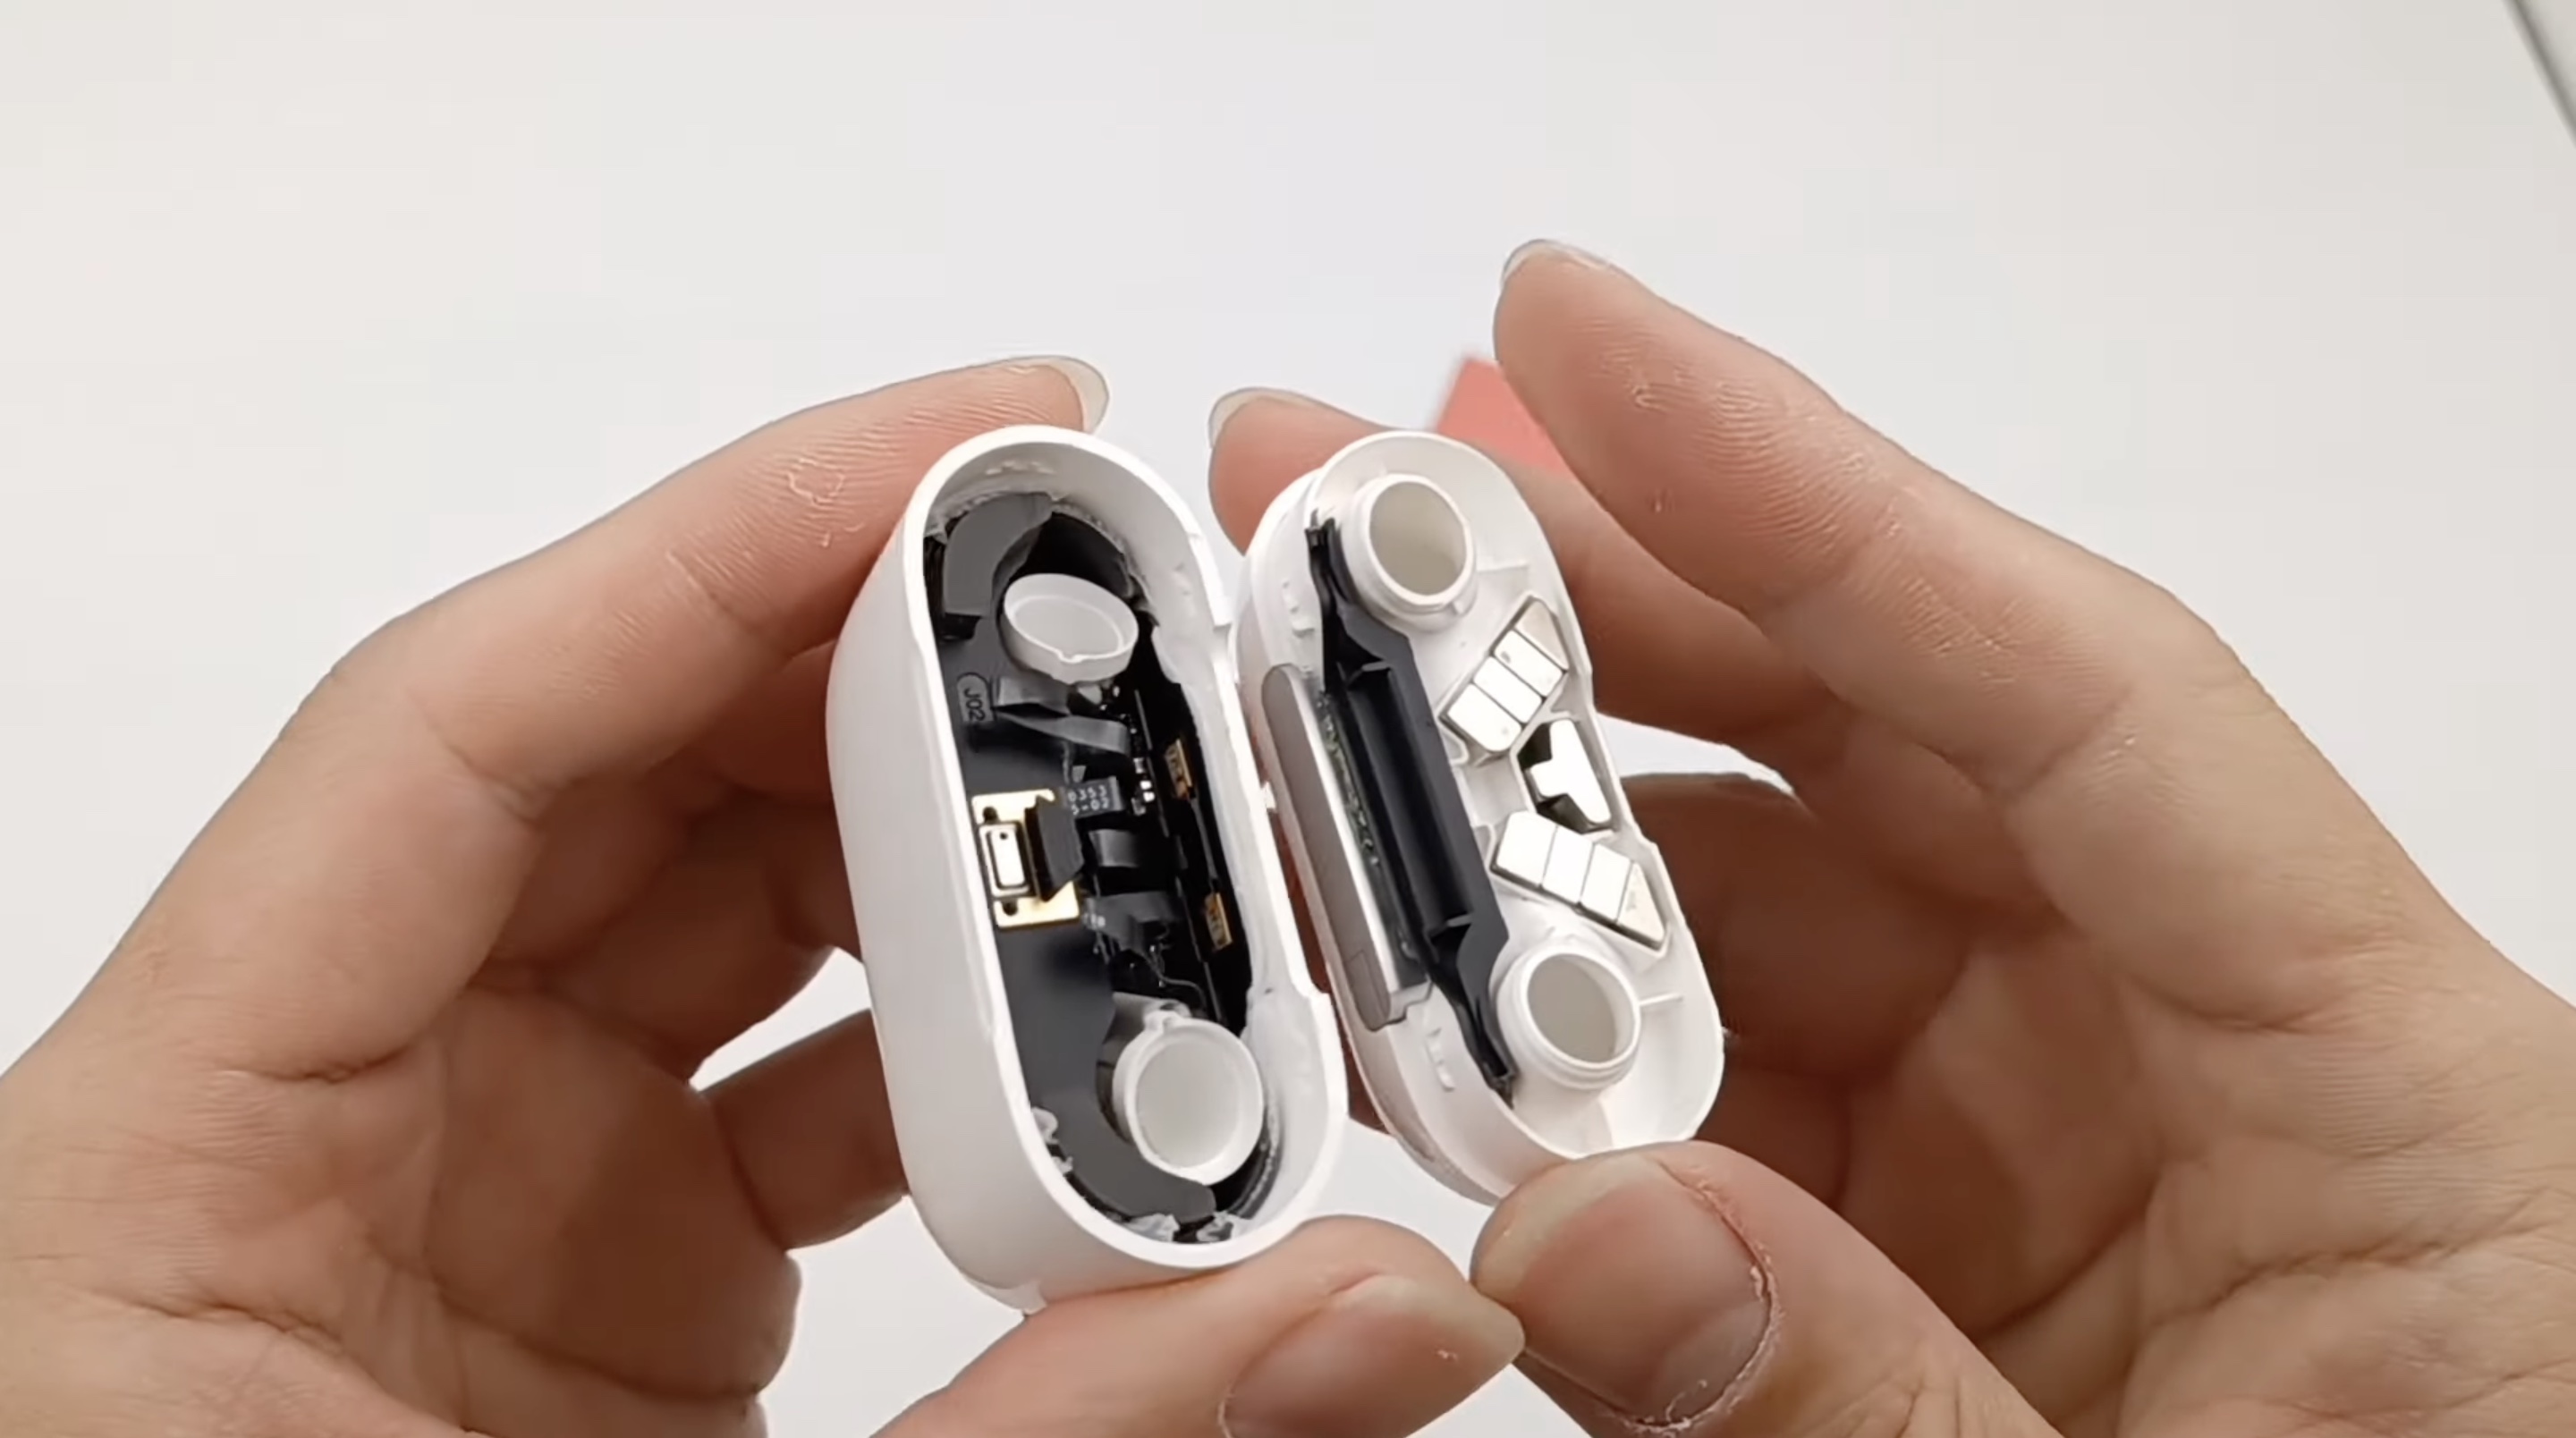 Airpods внутри. AIRPODS Pro 2 MAGSAFE. Чип h1 AIRPODS. Чехол AIRPODS Pro 2 MAGSAFE. Наушники TWS Apple AIRPODS 3.